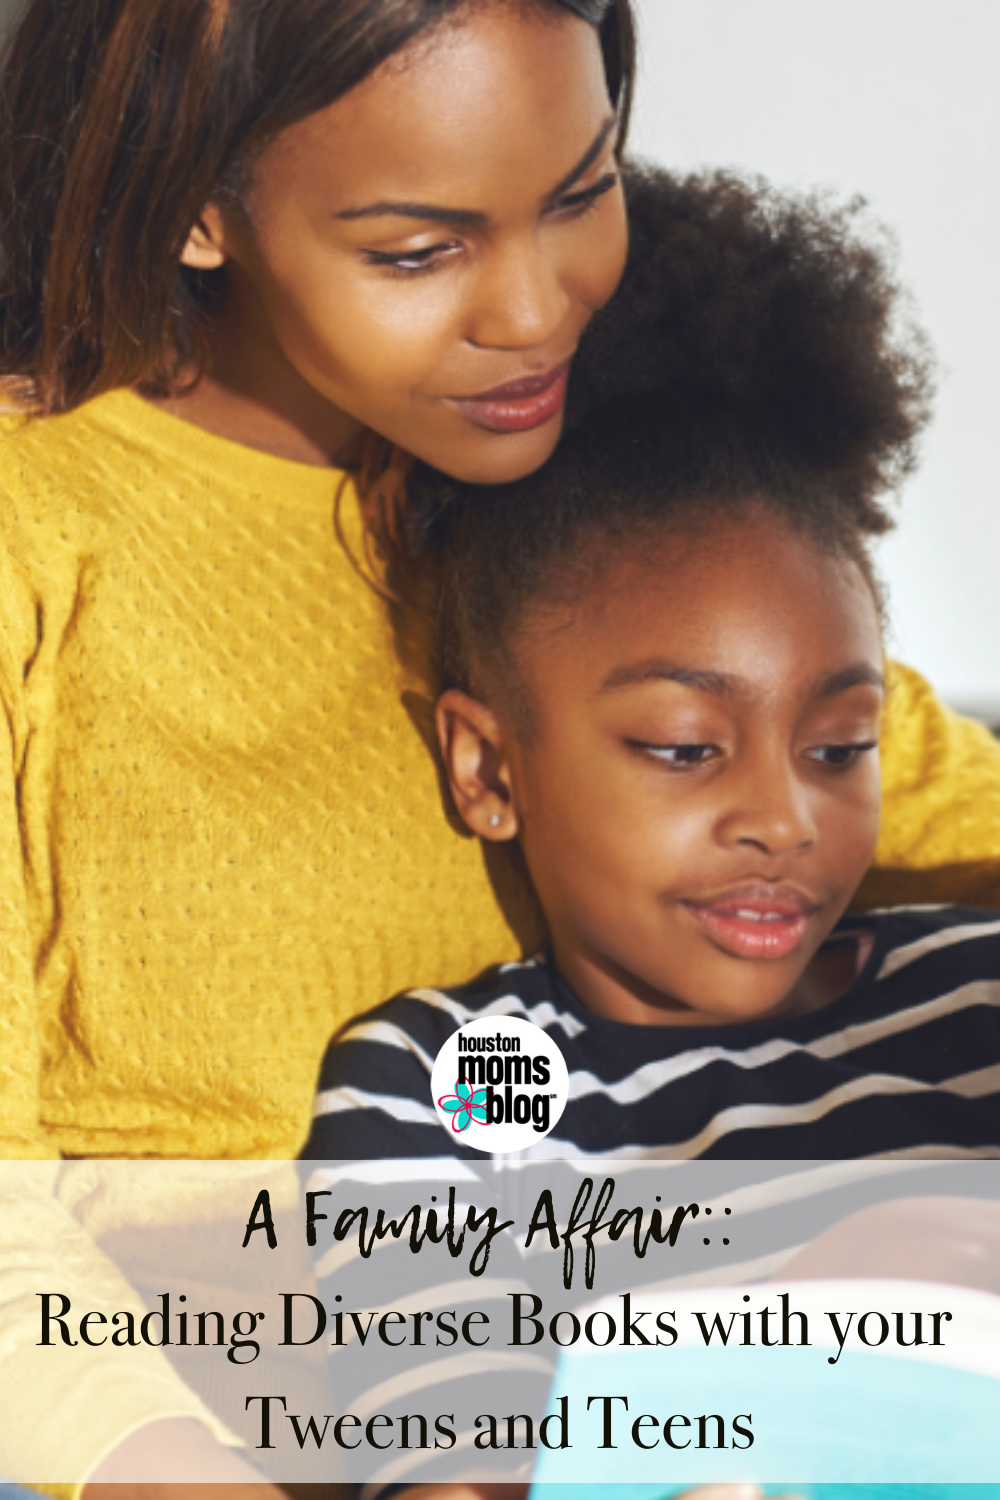 Houston Moms Blog "A Family Affair:: Reading Diverse Books with your Tweens and Teens" #houstonmomsblog #momsaroundhouston